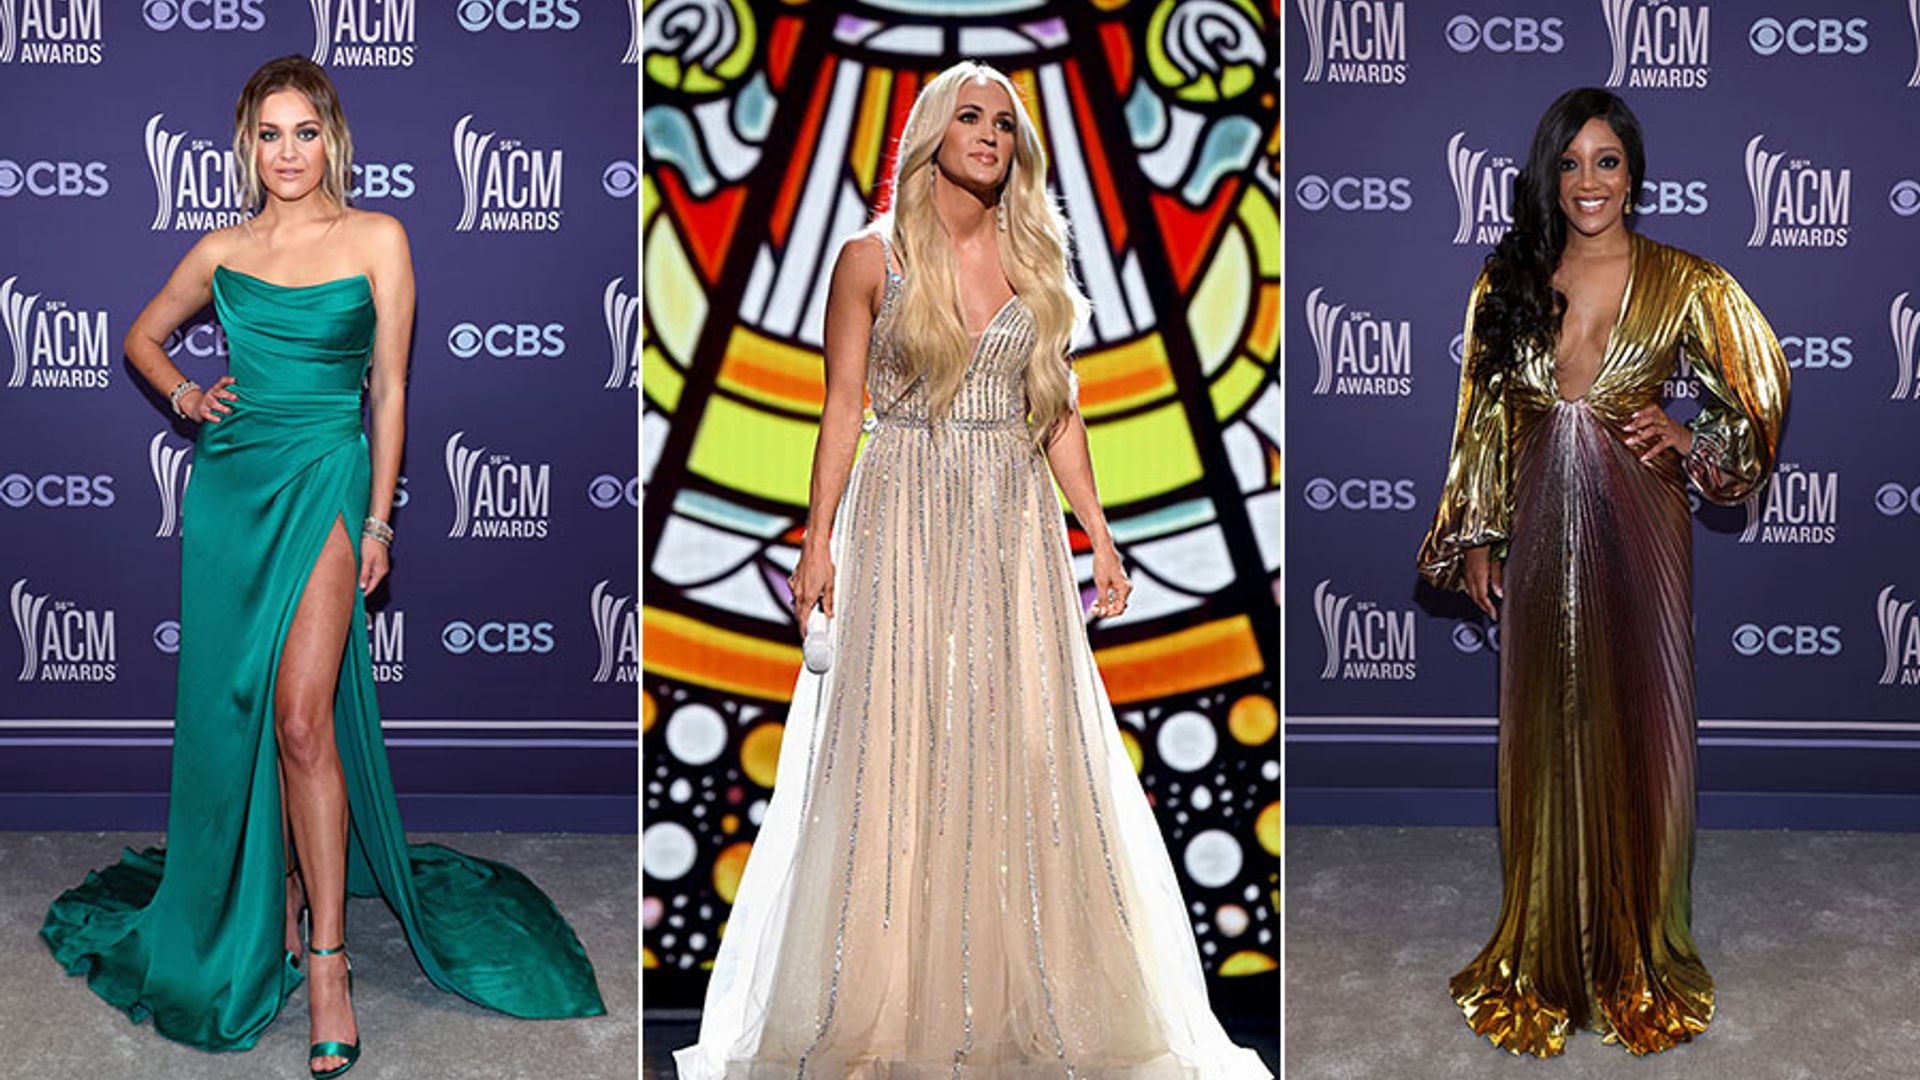 2021 ACM Awards: All the striking looks you need to see